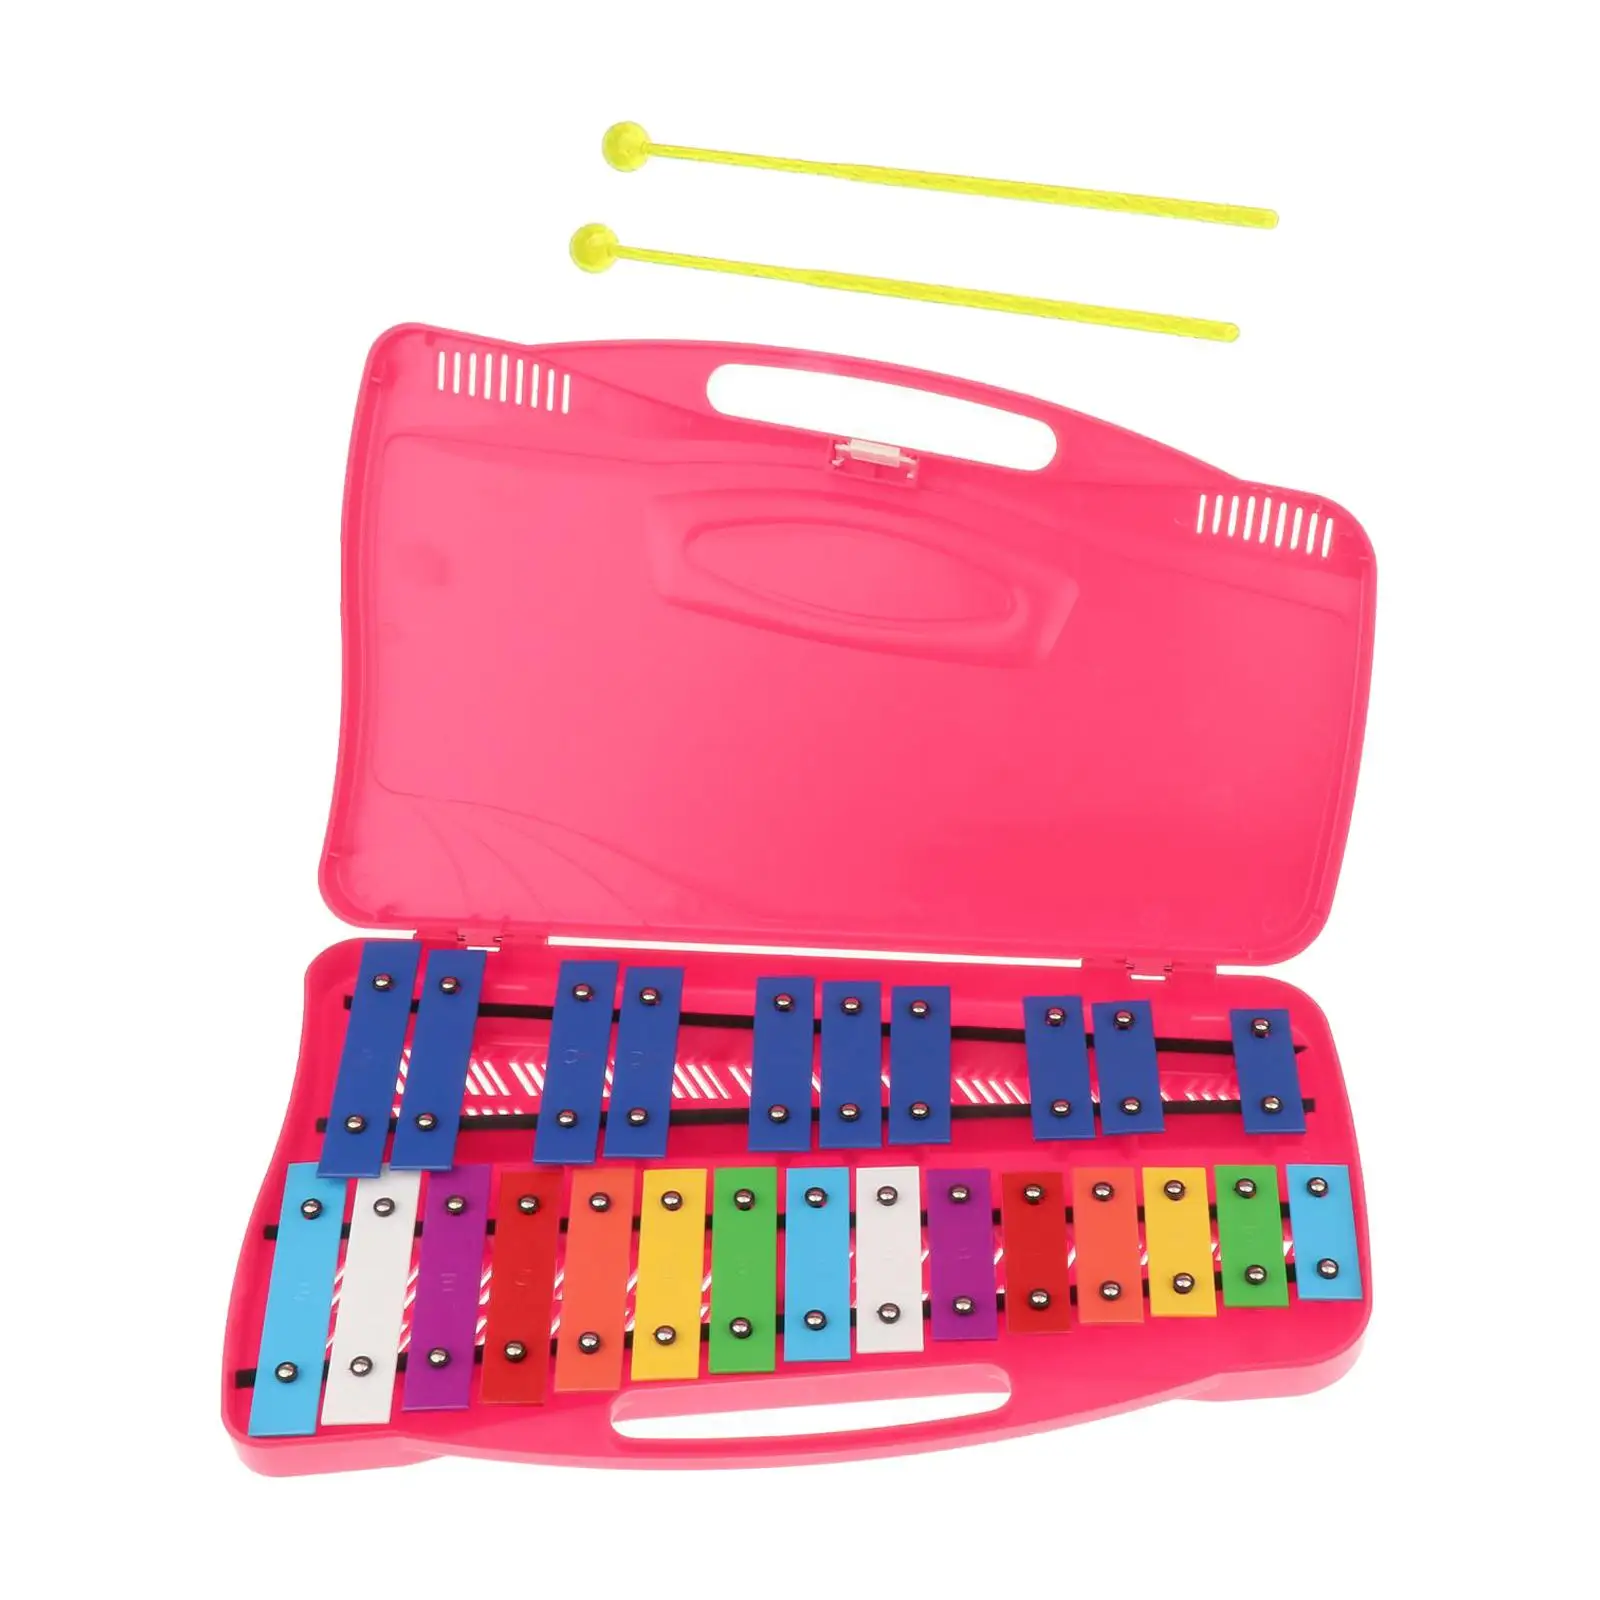 25 Note Xylophone with Case for Beginners Preschool Adult Percussion 